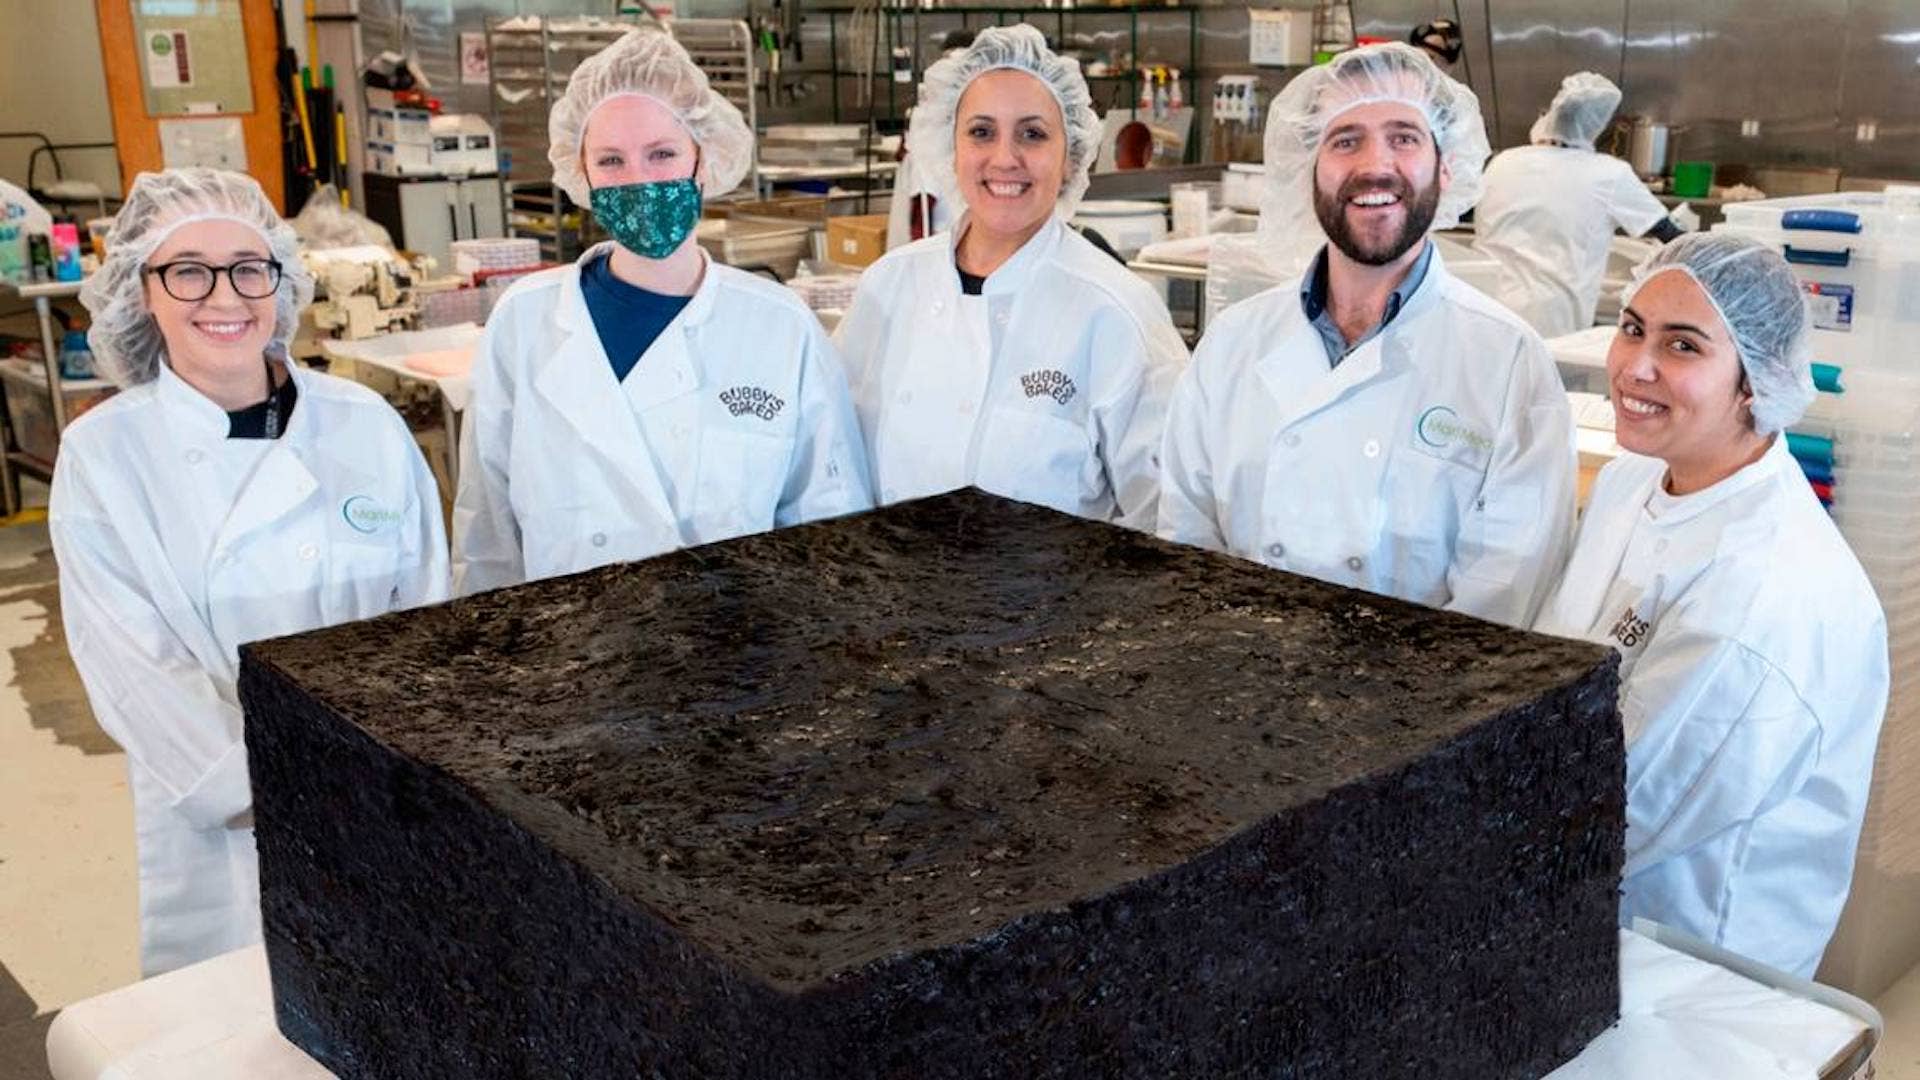 MariMed unveils the world's largest weed brownie